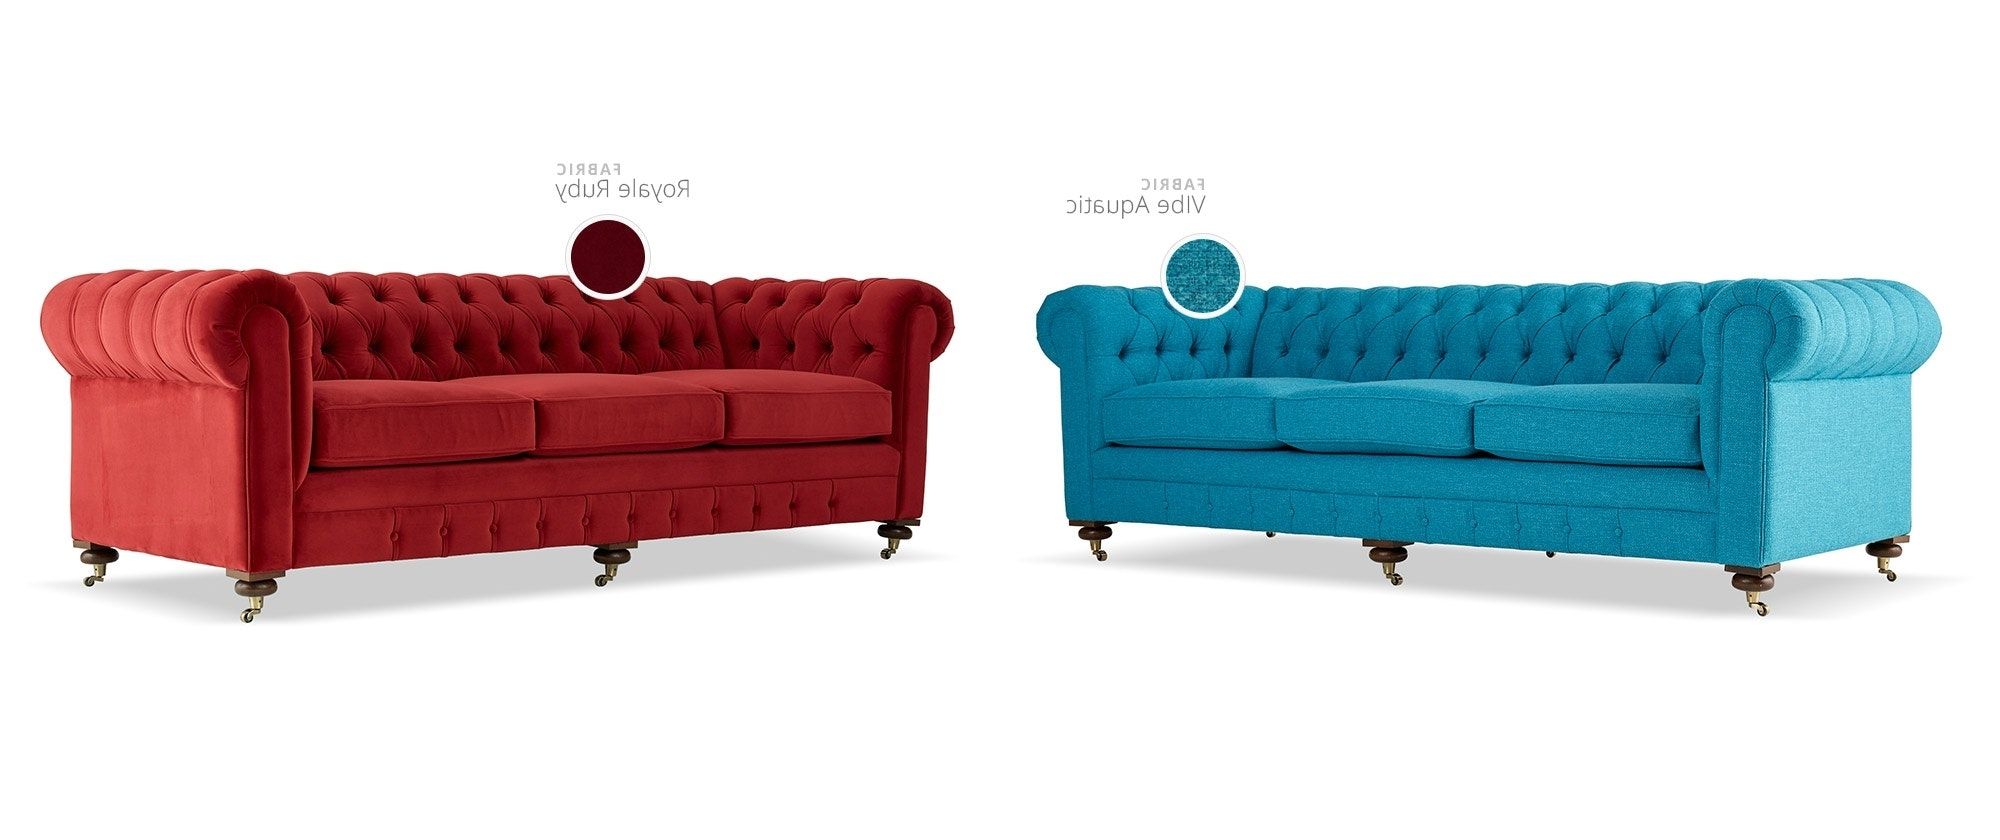 Turquoise Sofas Throughout Best And Newest Liam Sofa (View 16 of 20)